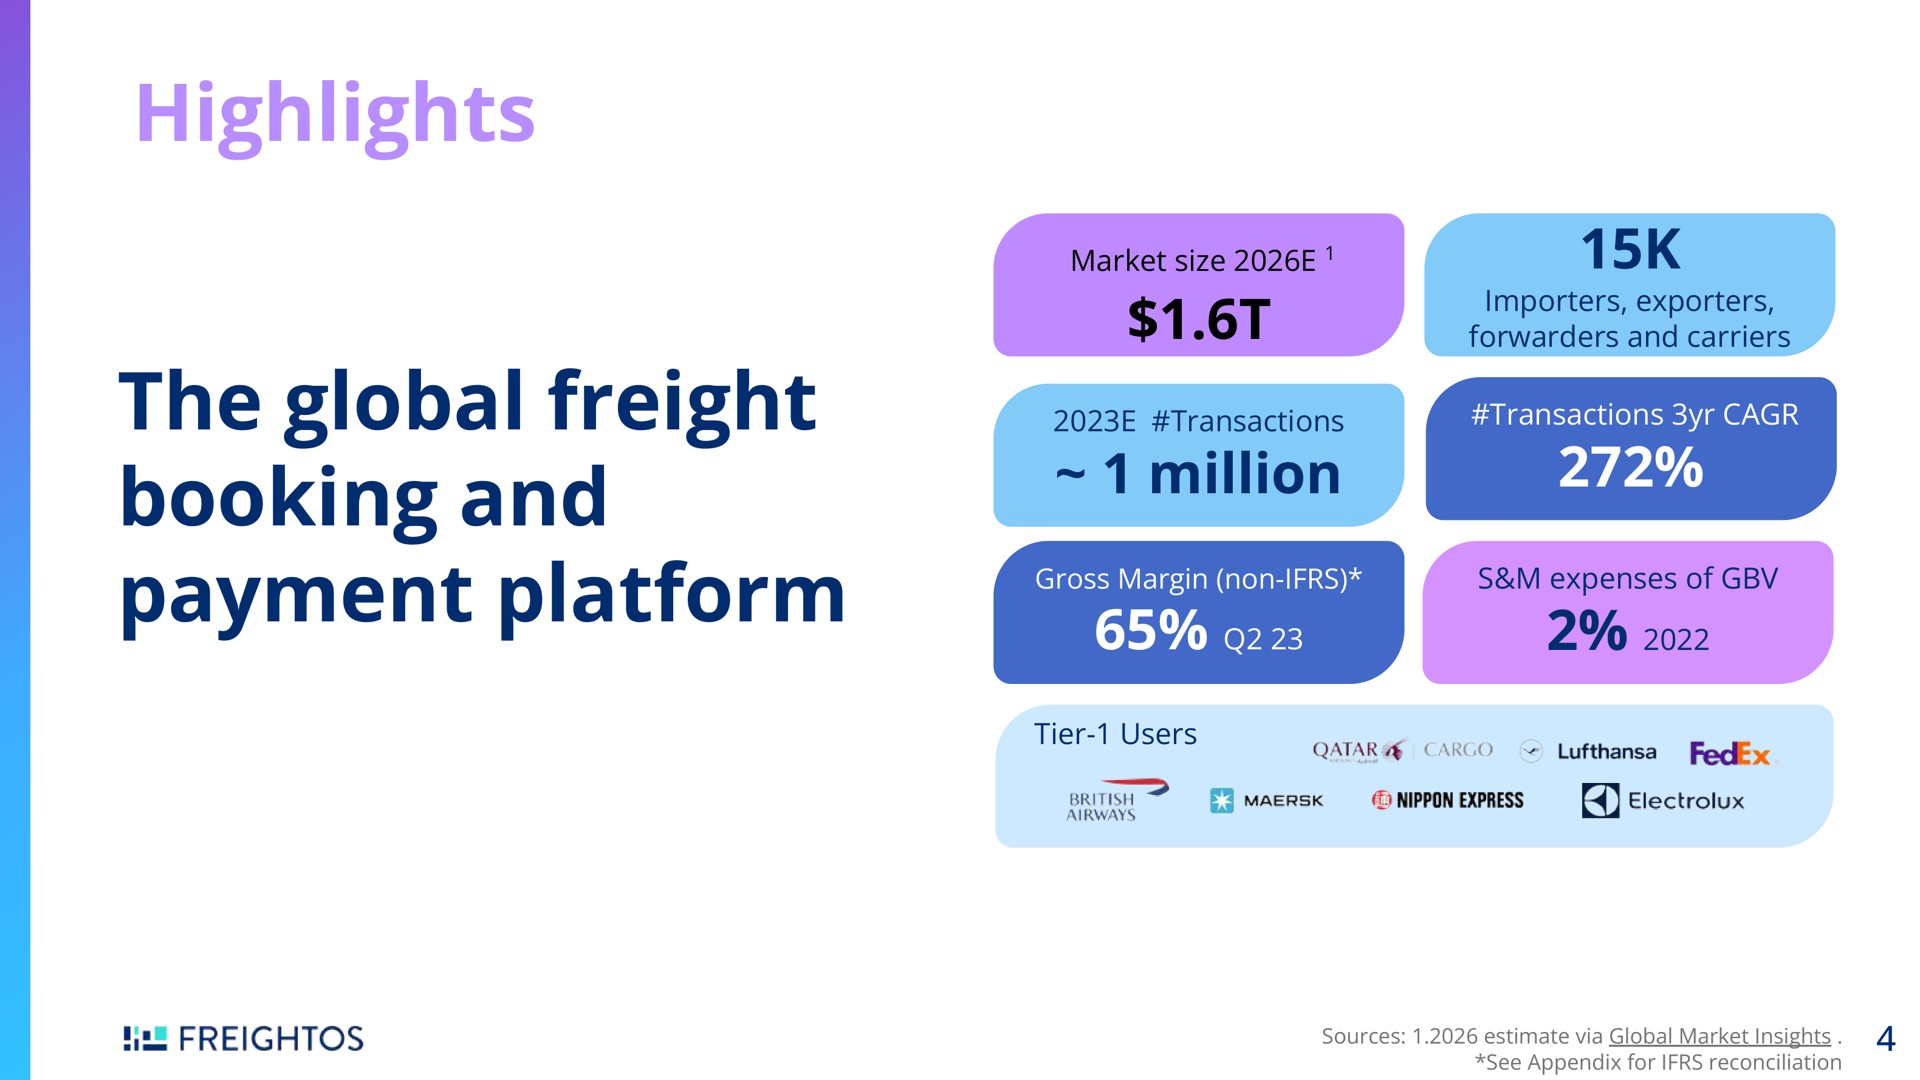 highlights the global freight booking and payment platform ale | Freightos